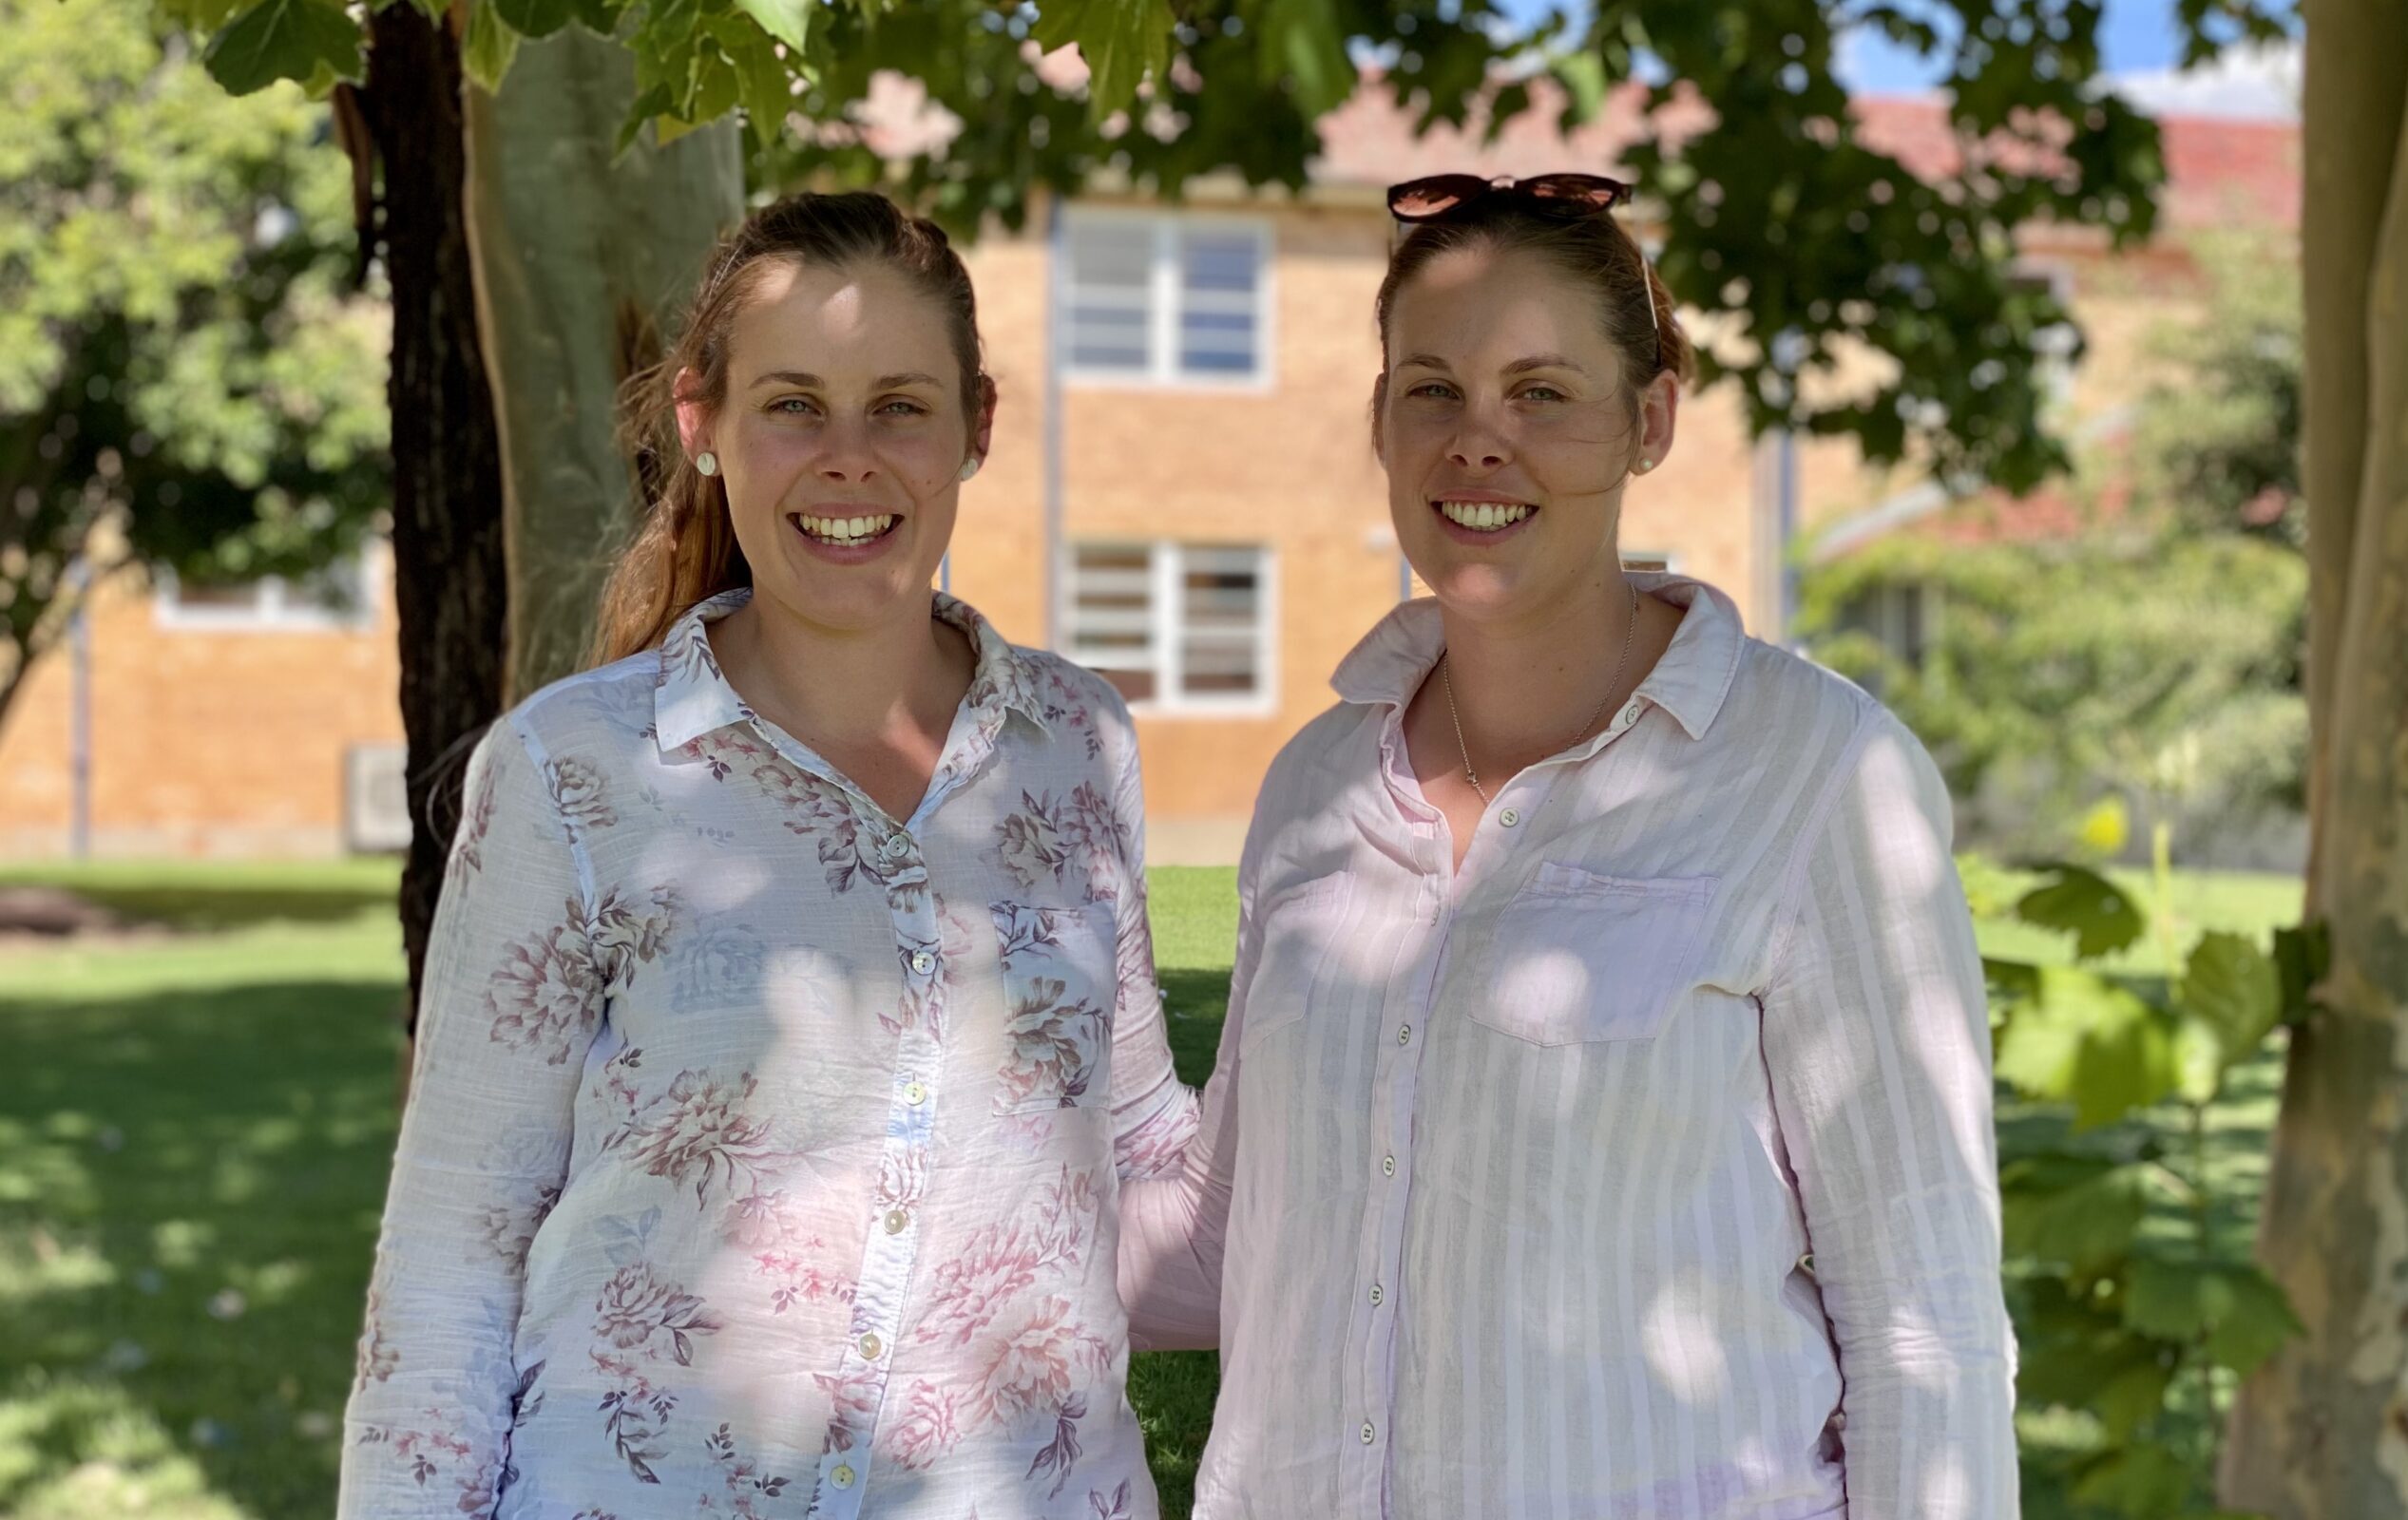 Twin sisters take on roles as ag teachers at Narrabri and Wee Waa high schools